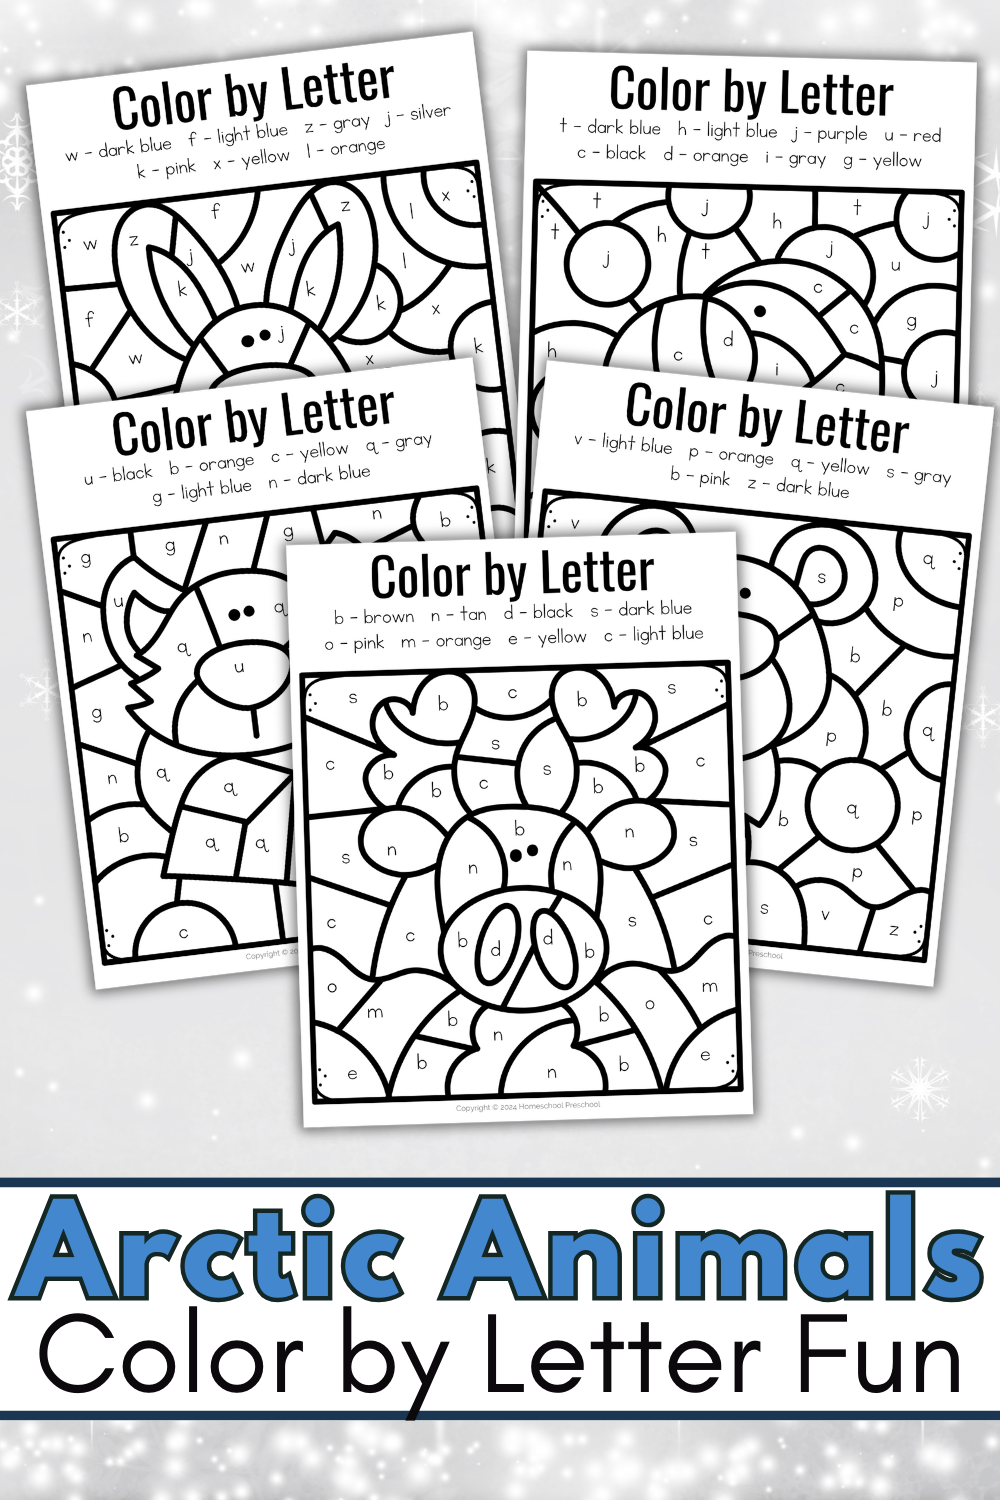 arctic-animals-worksheet Arctic Animals Color by Letter Printable